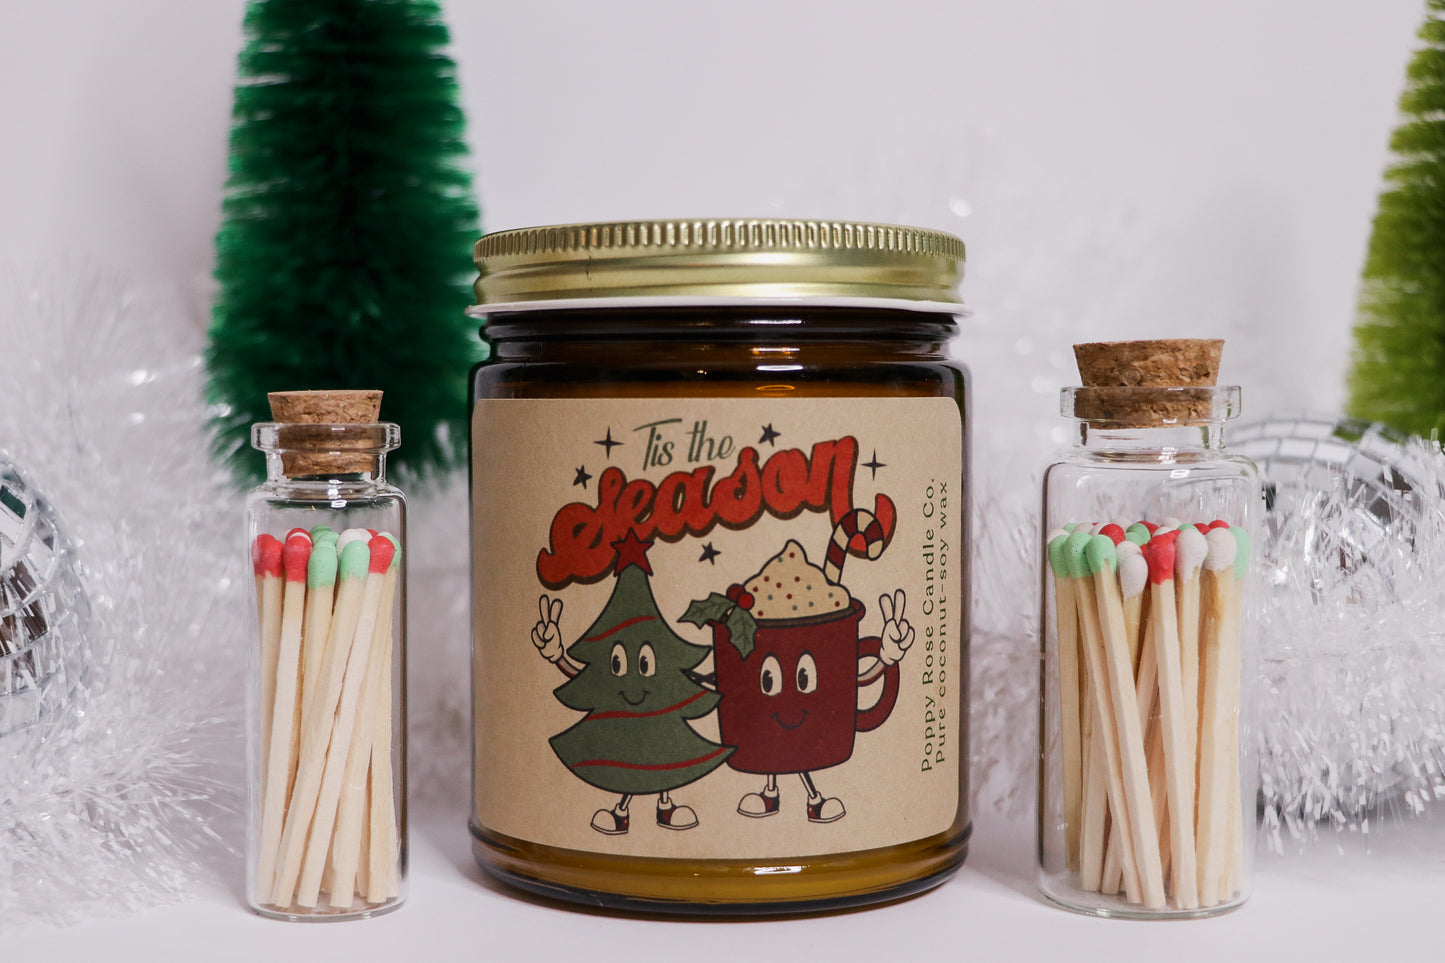 Christmassy Matches in Medium Corked Vial